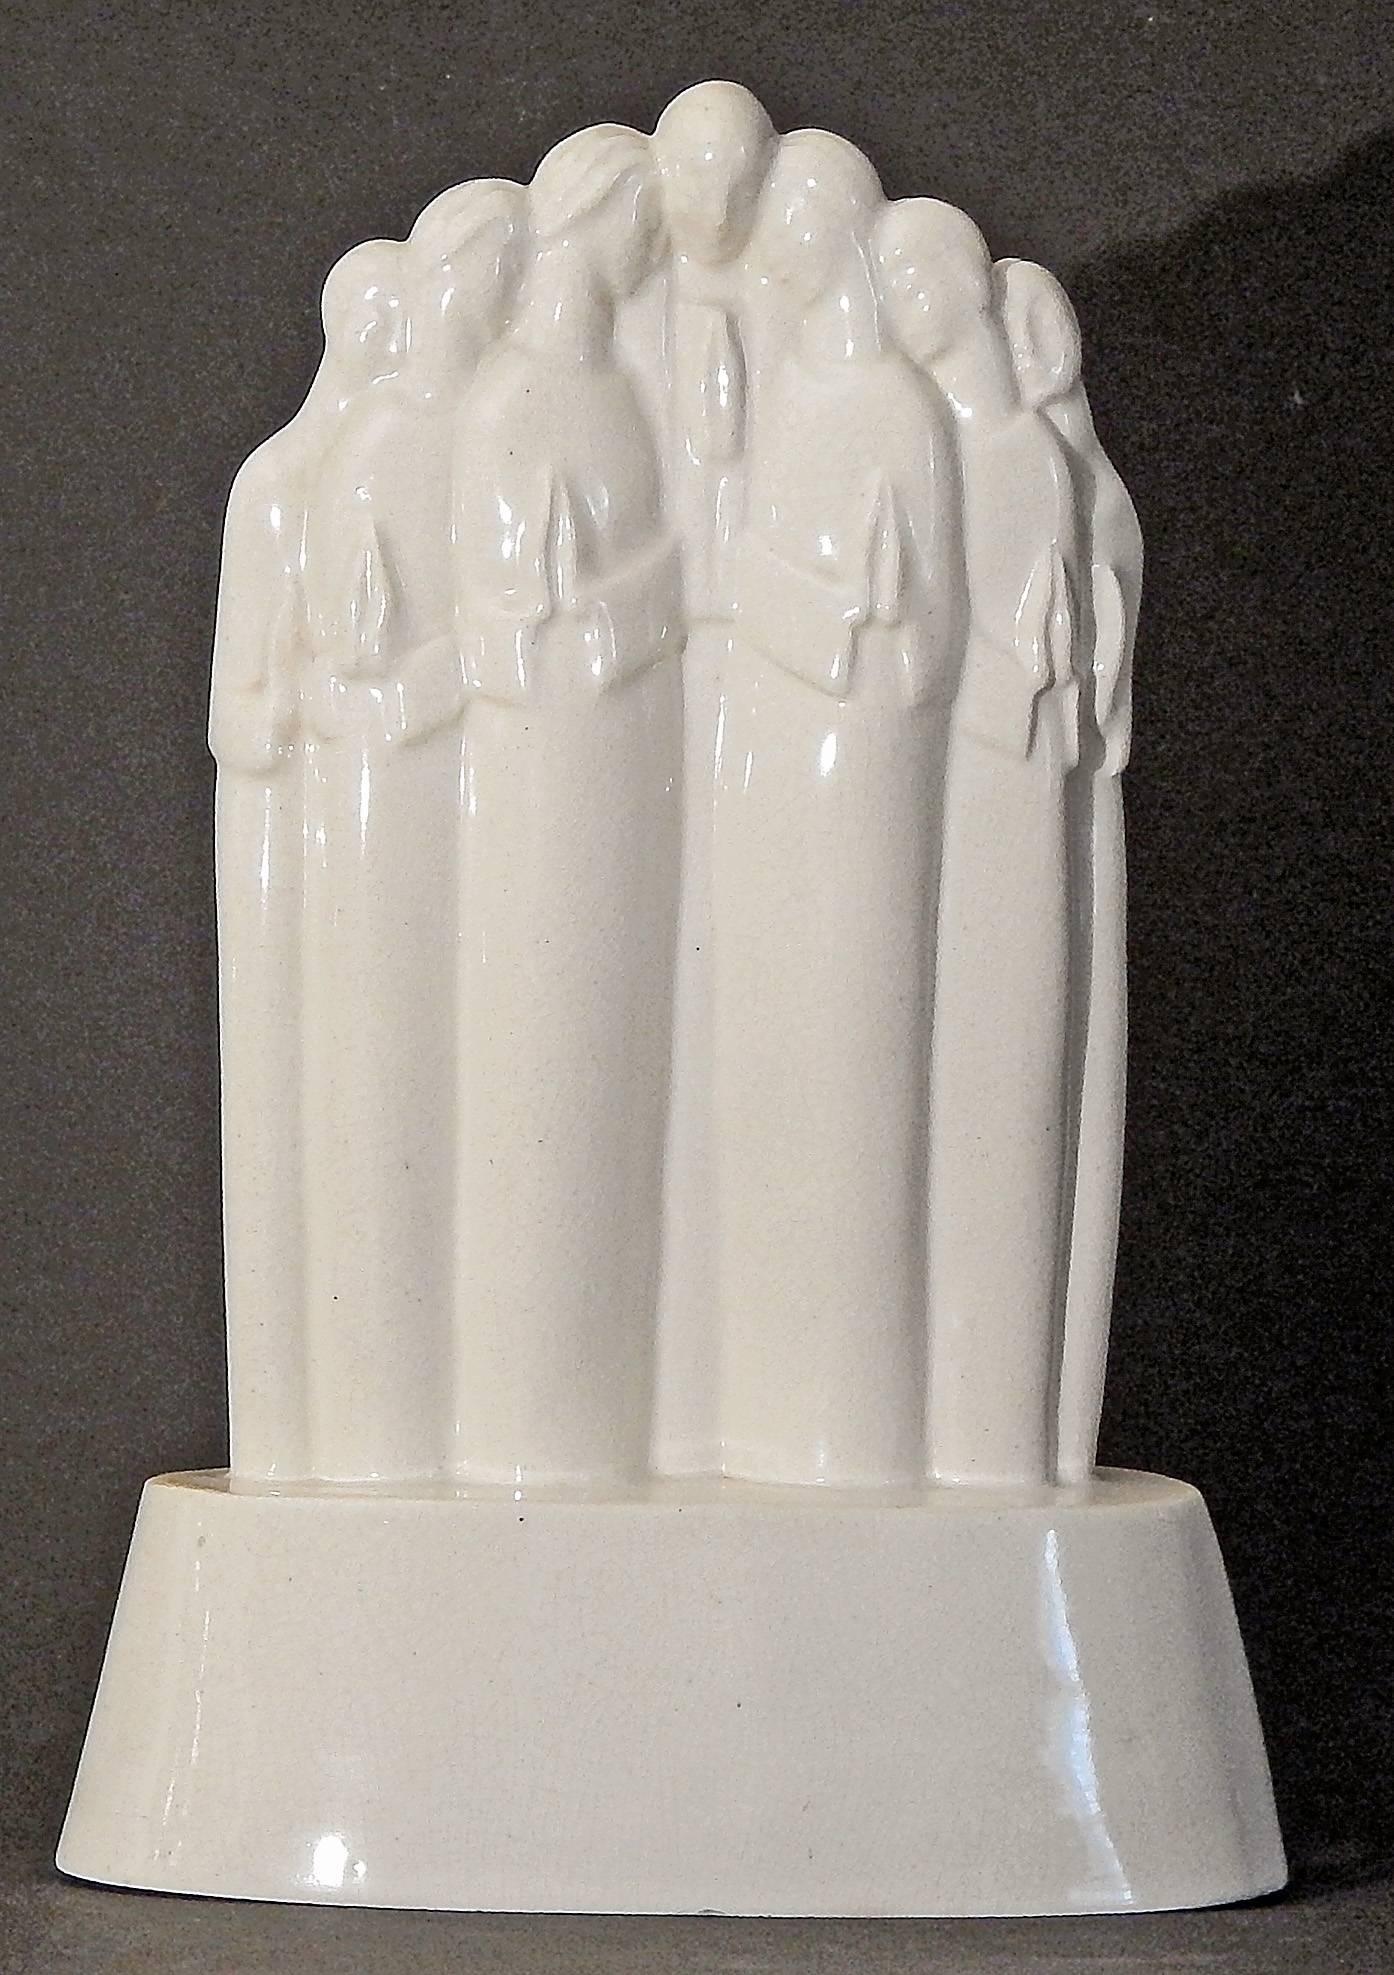 One of the rarest and most important sculptures eminating from the ARKO ceramic school established by Alexander Archipenko in Woodstock, New York, this stylized group of praying figures was created by Lu Duble. Archipenko studied in Kiev and Paris